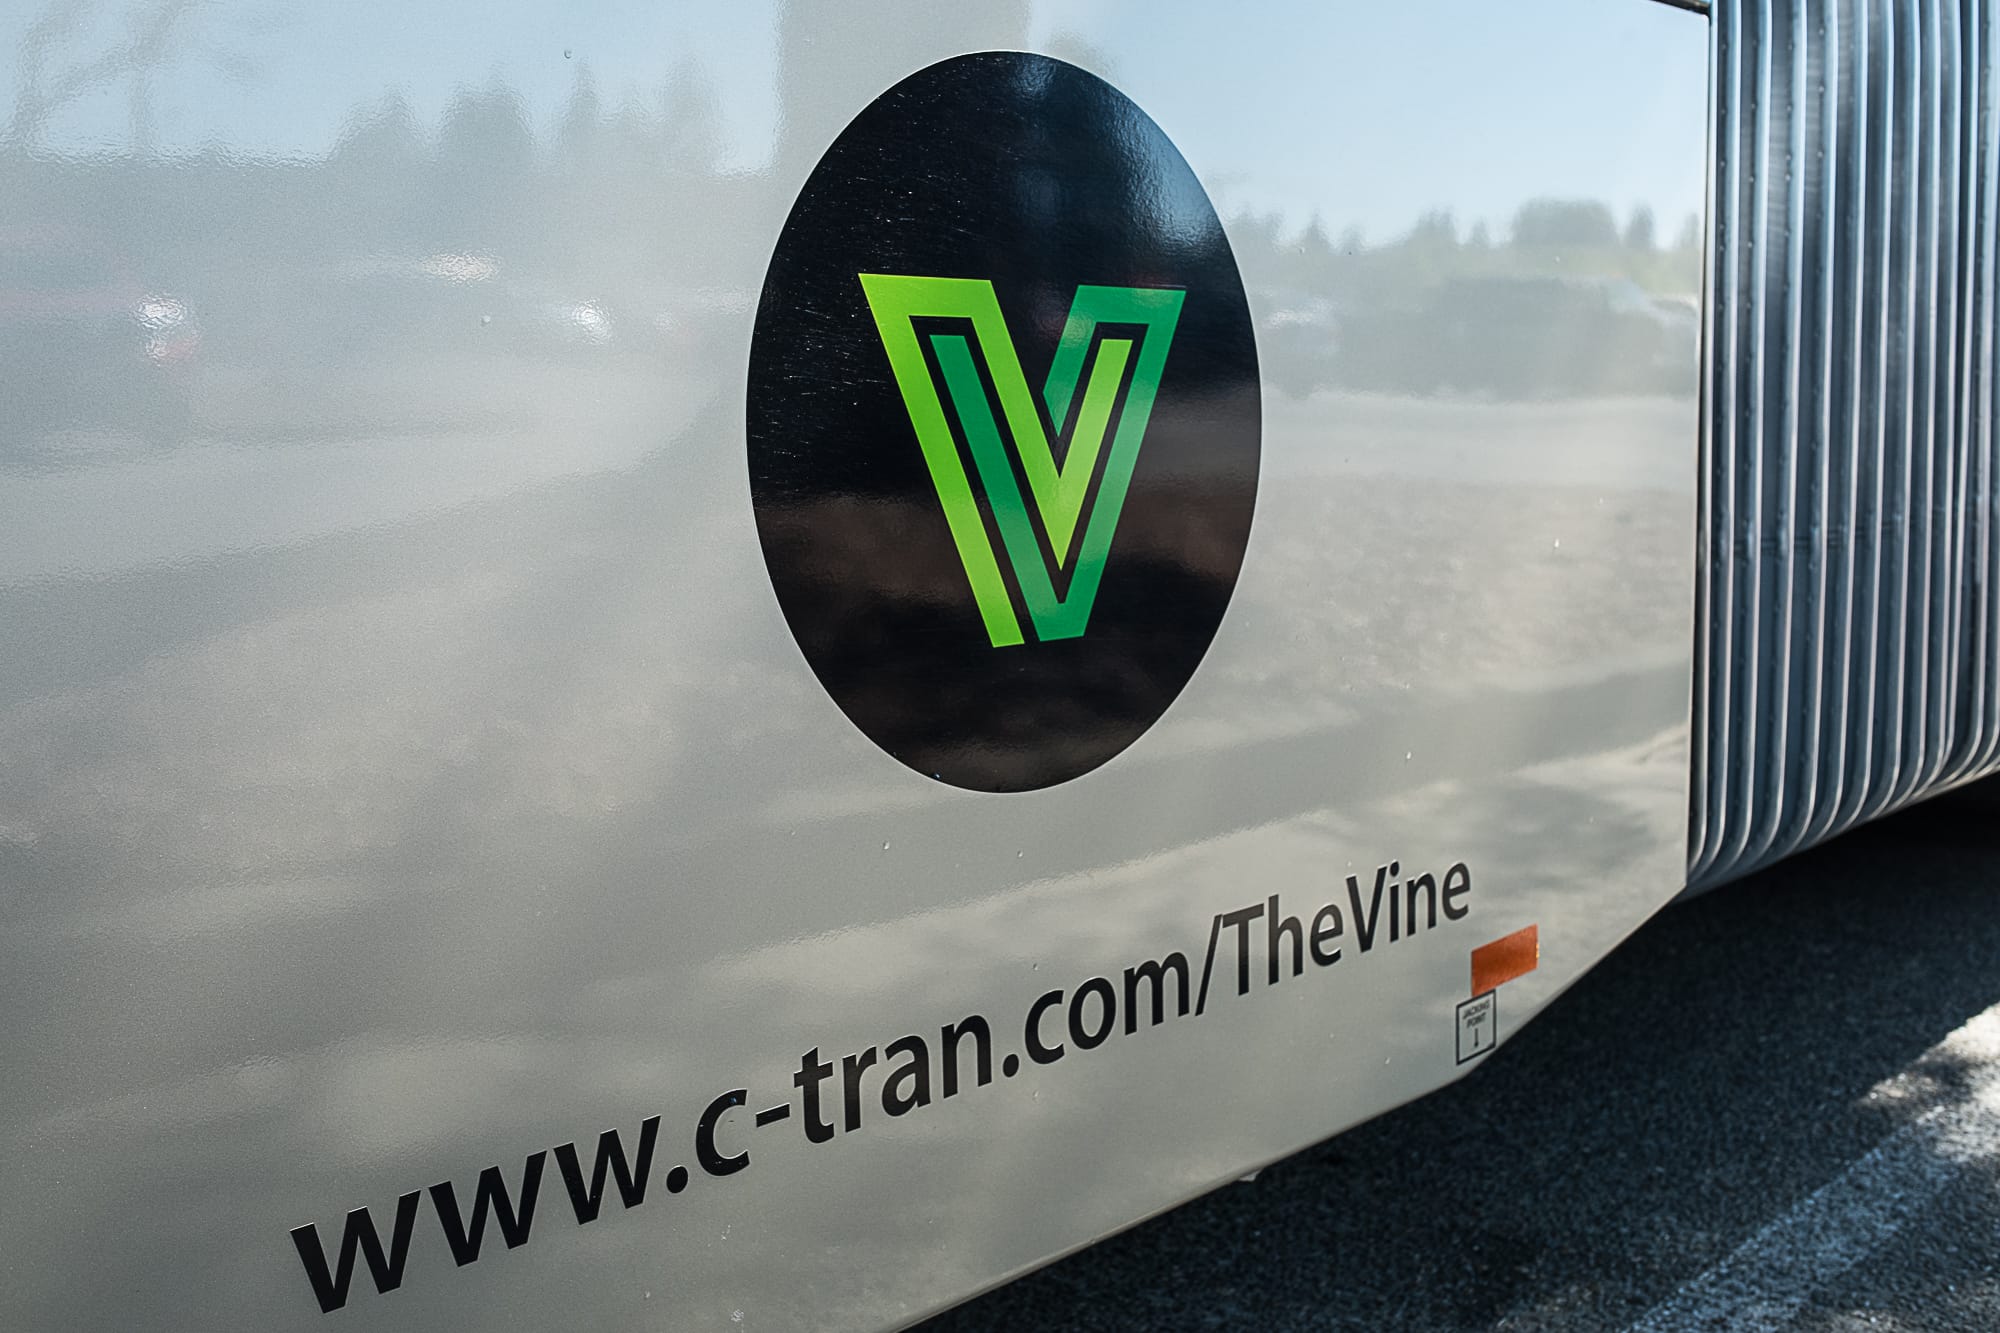 View of the side panel of C-Tran's new bus designed for the Vine, Vancouver's new transit corridor.